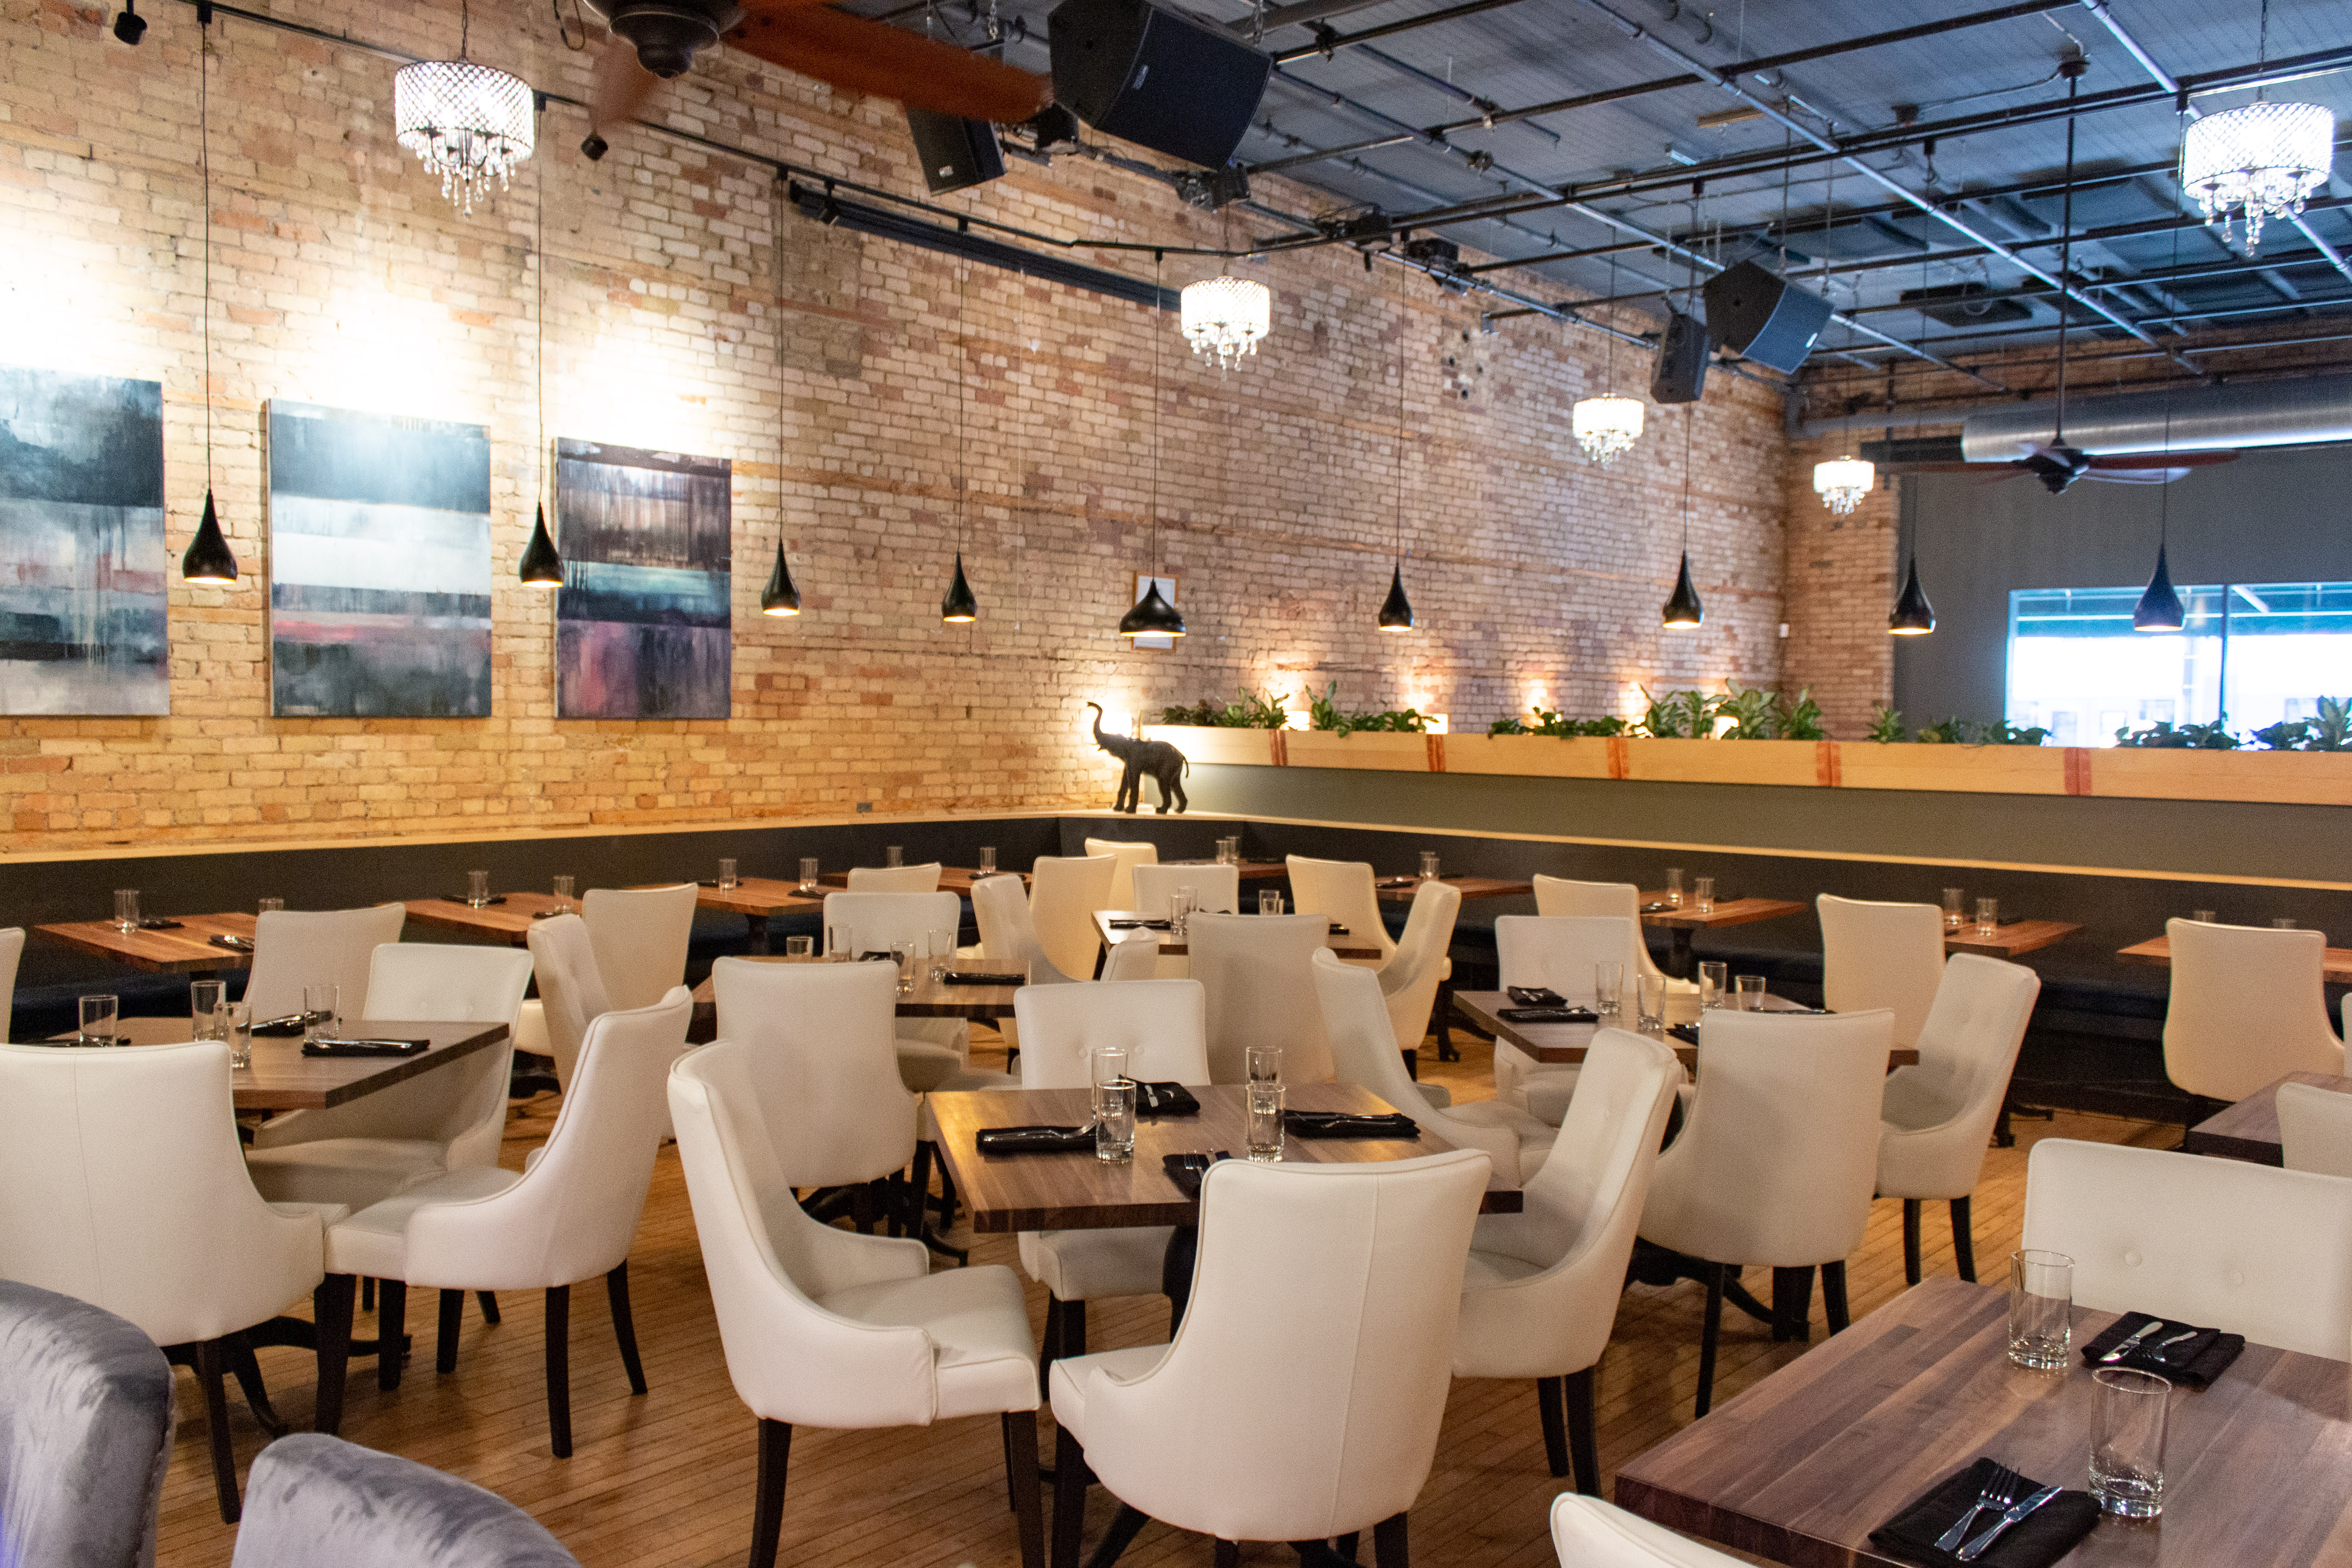 The yellow-lit dining room with brick walls and white chairs with wood tables.